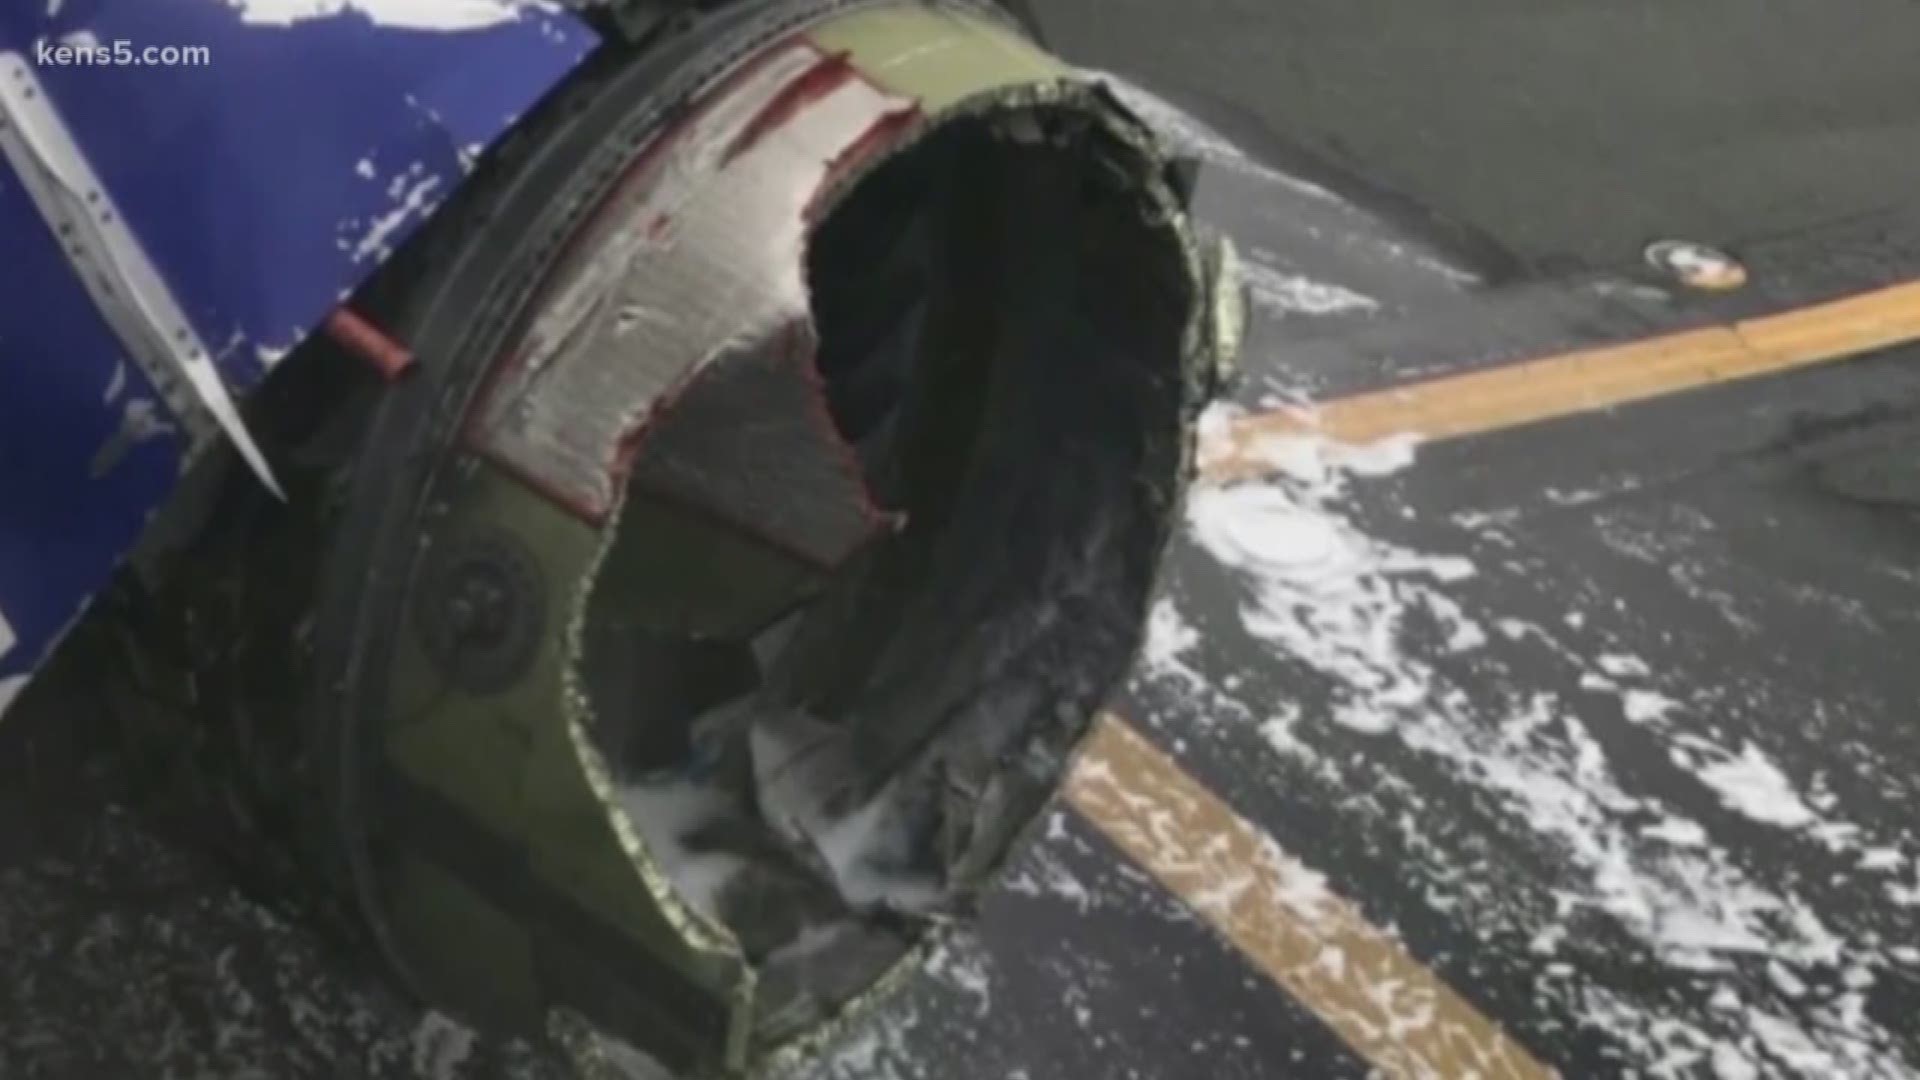 Passengers and crew call her a hero with 'nerves of steel.' The Southwest Airlines pilot who landed a plane with a blown engine is getting accolades for preventing a far worse tragedy. Eyewitness News reporter Priya Sridhar has more.